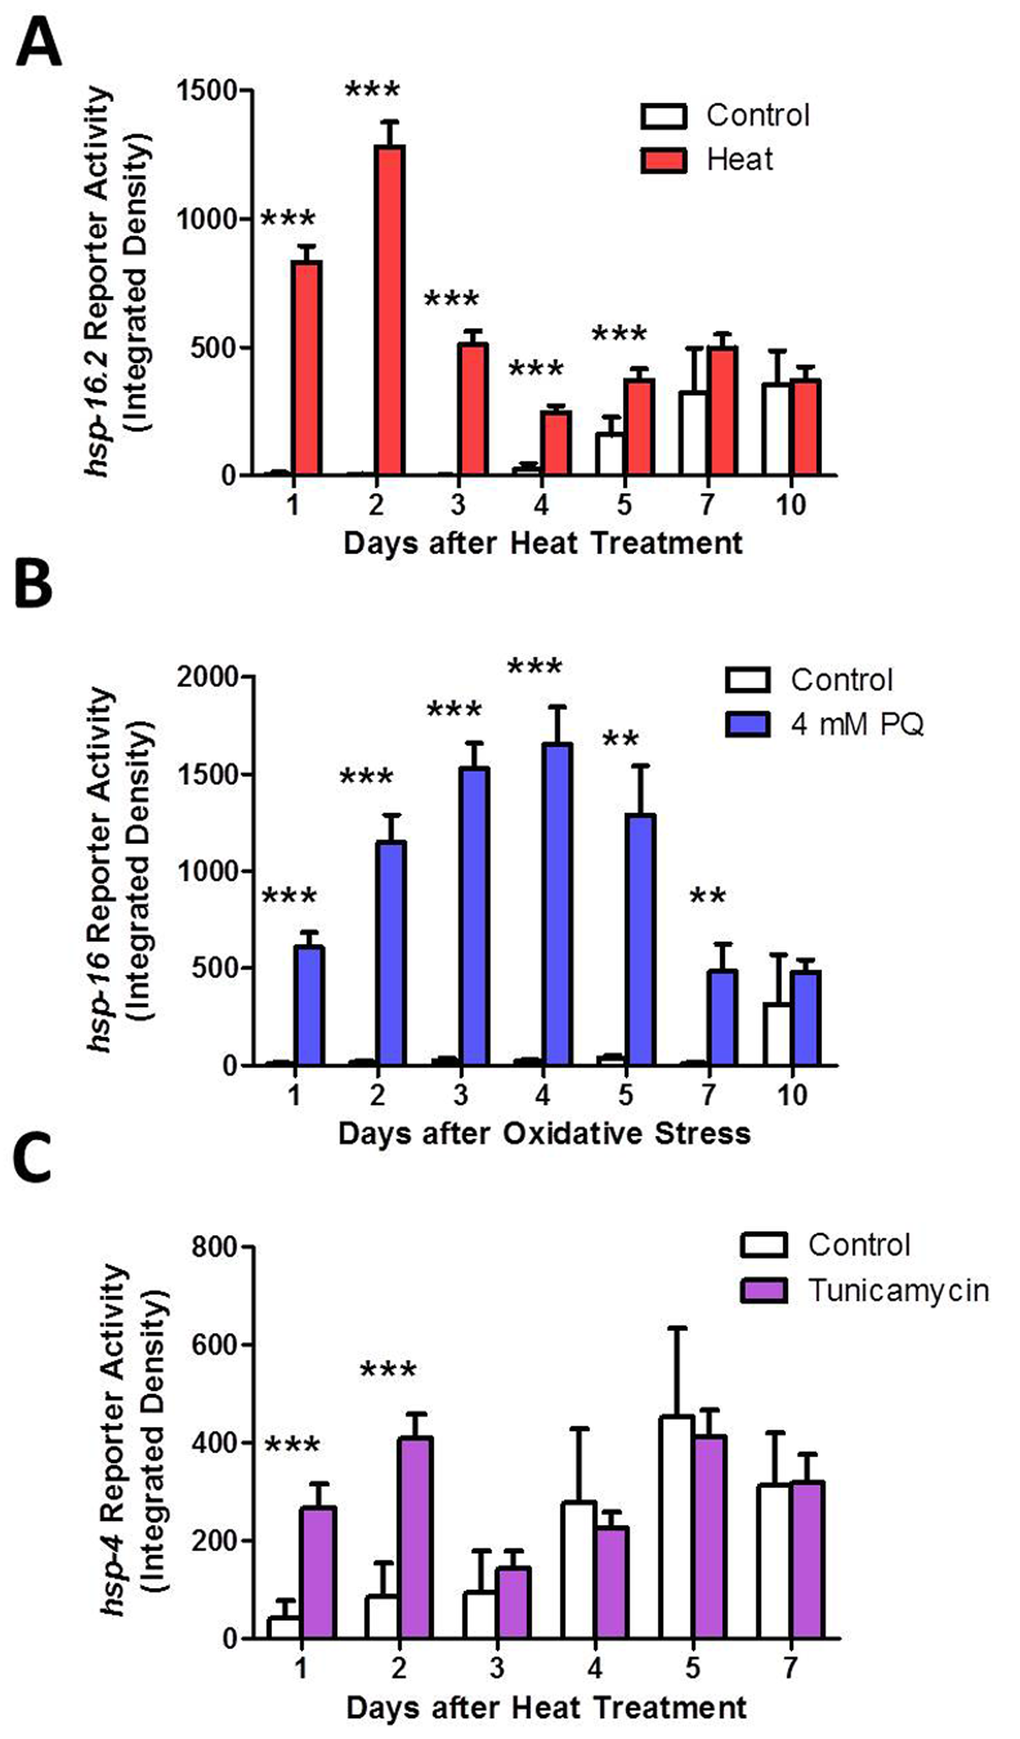 Activation of heat shock response (HSR), mitochondrial unfolded protein response (mitoUPR) and endoplasmic reticulum unfolded protein response (ER-UPR) lasts for multiple days after induction